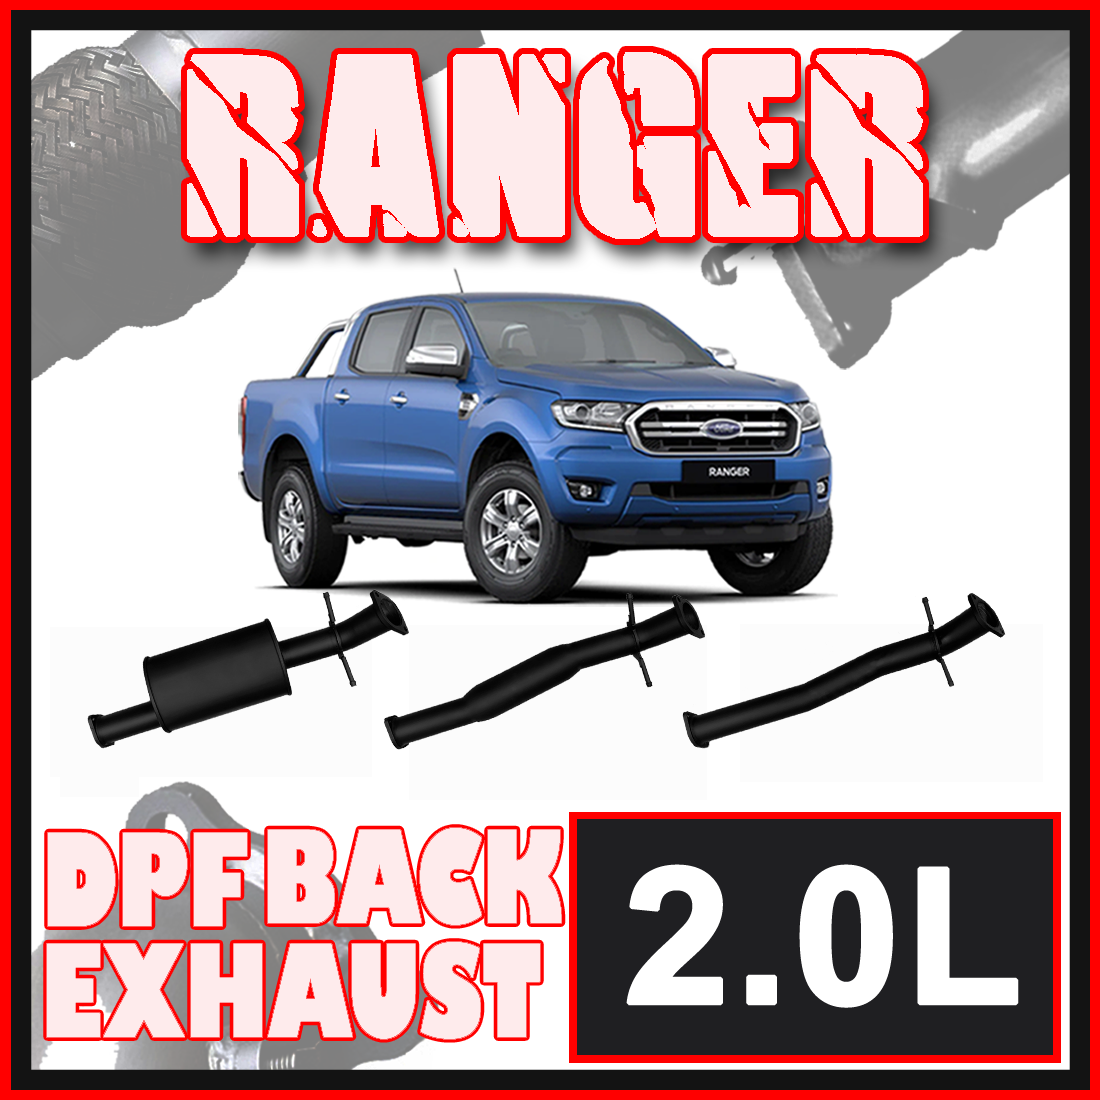 Ford Ranger 2.0L PX3 DPF Model Ignite Exhaust image